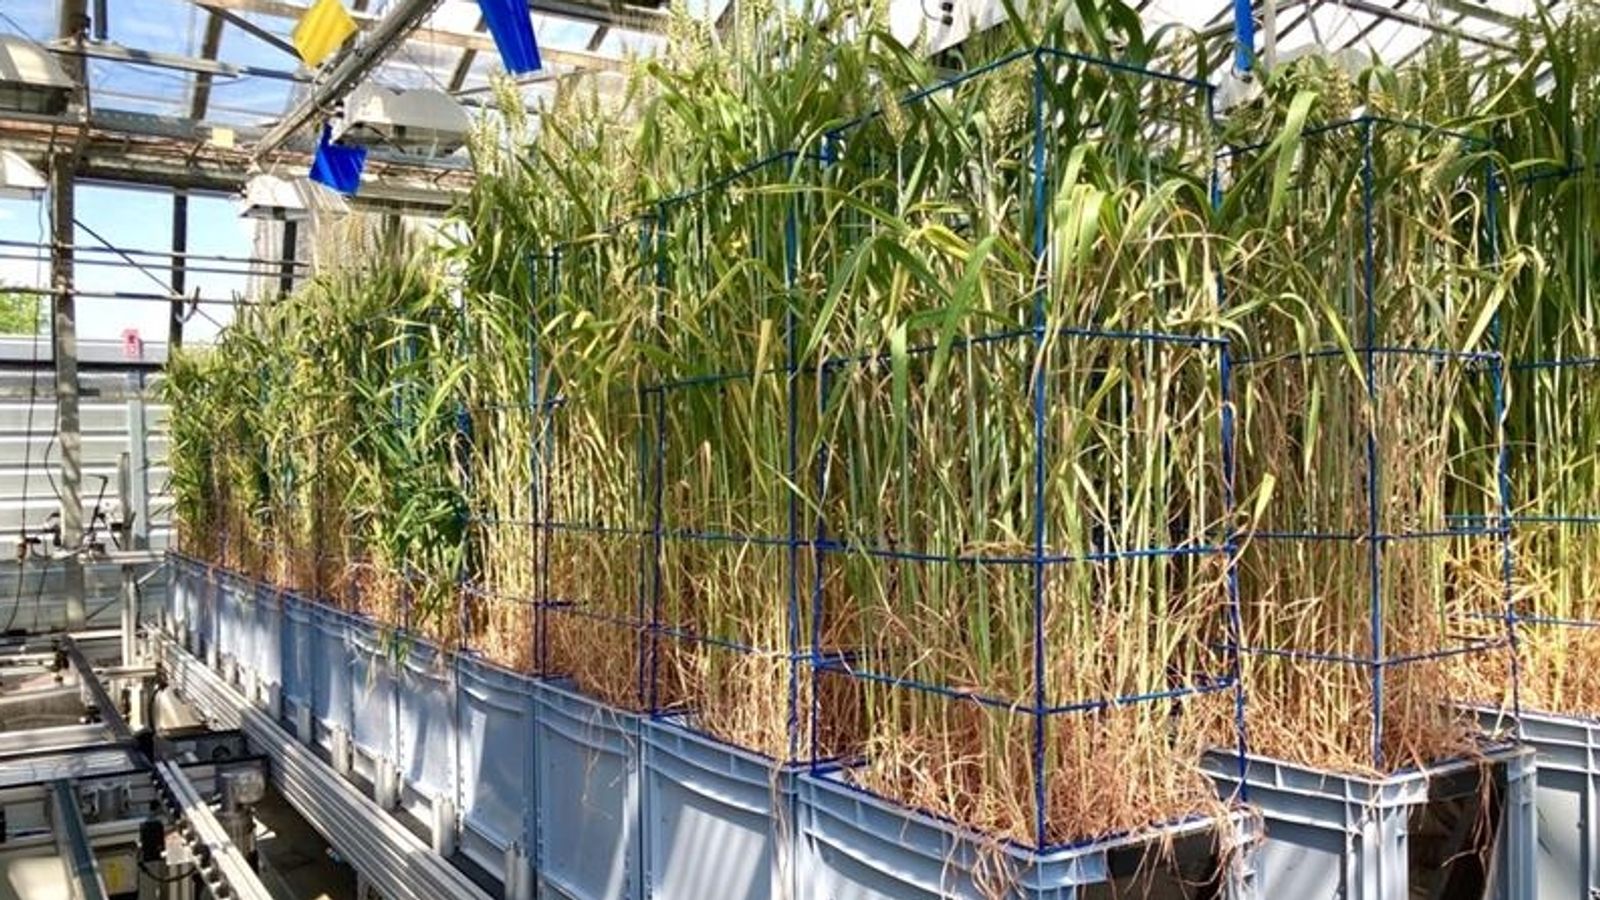 Drought in the Greenhouse: Breeding Cereals for Climate Change